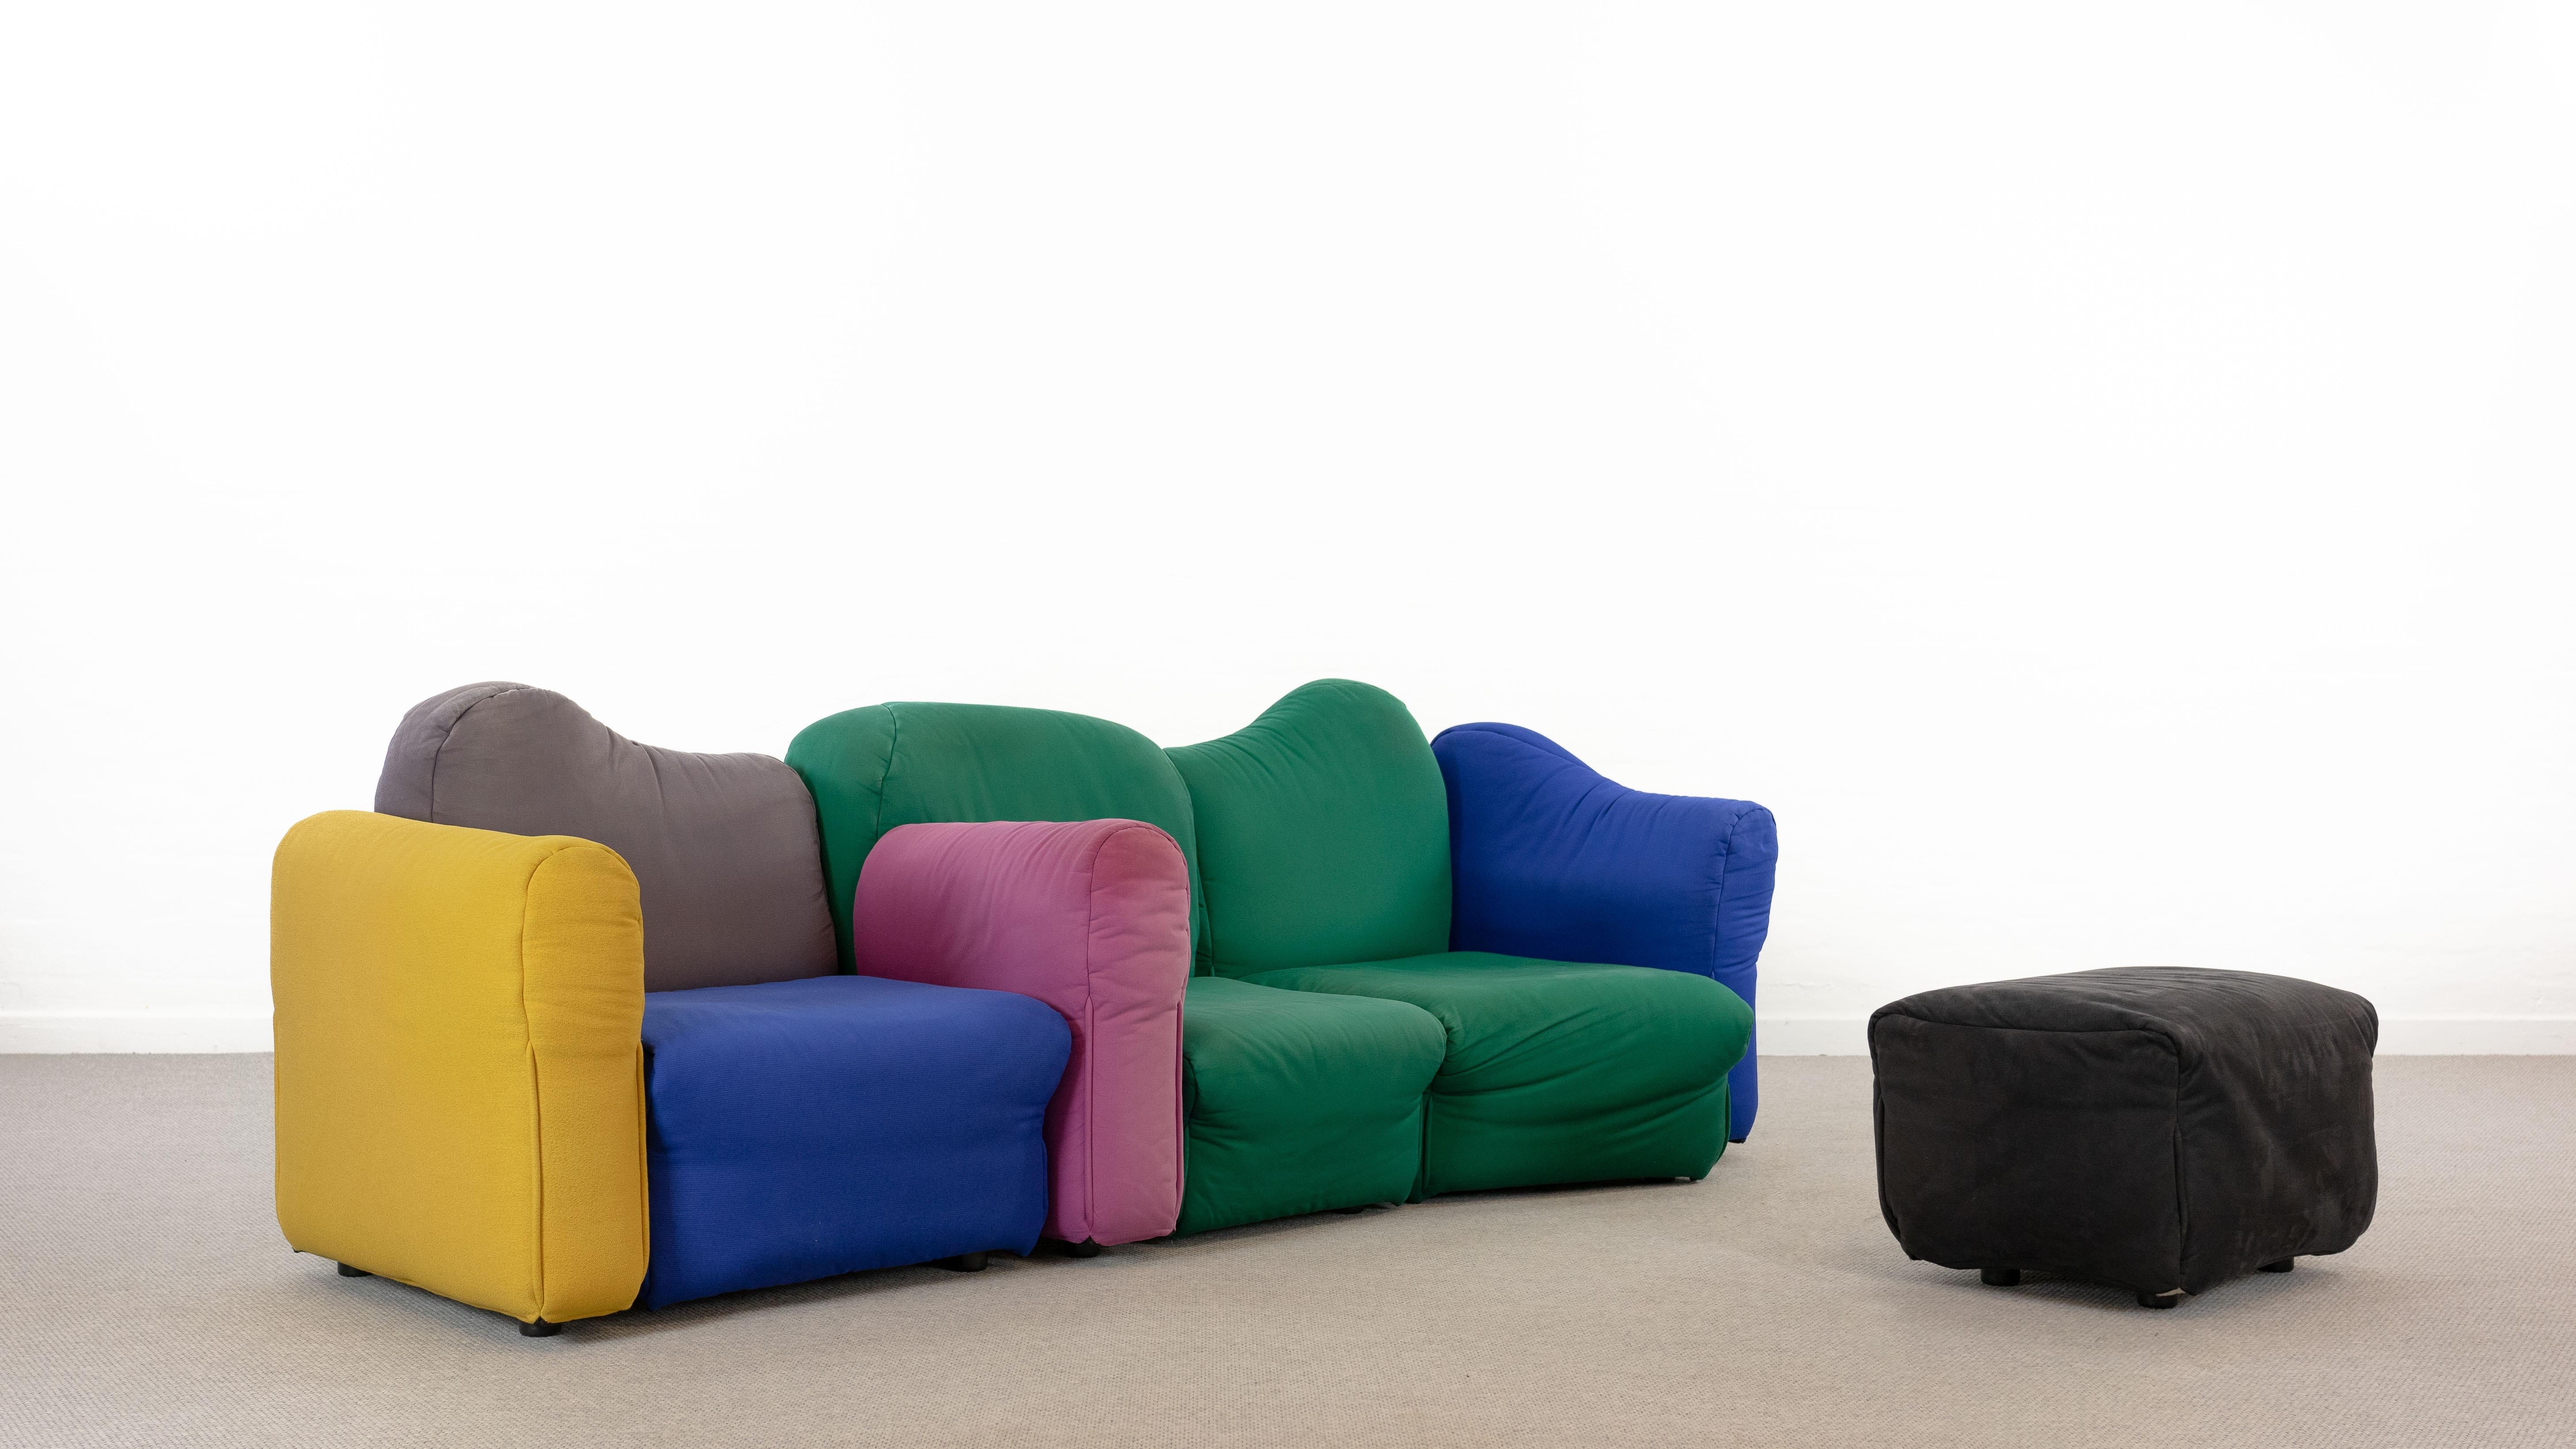 Fabric Cannaregio Modular Sofa with Footrest by Gaetano Pesce for Cassina, Italy 1986 For Sale